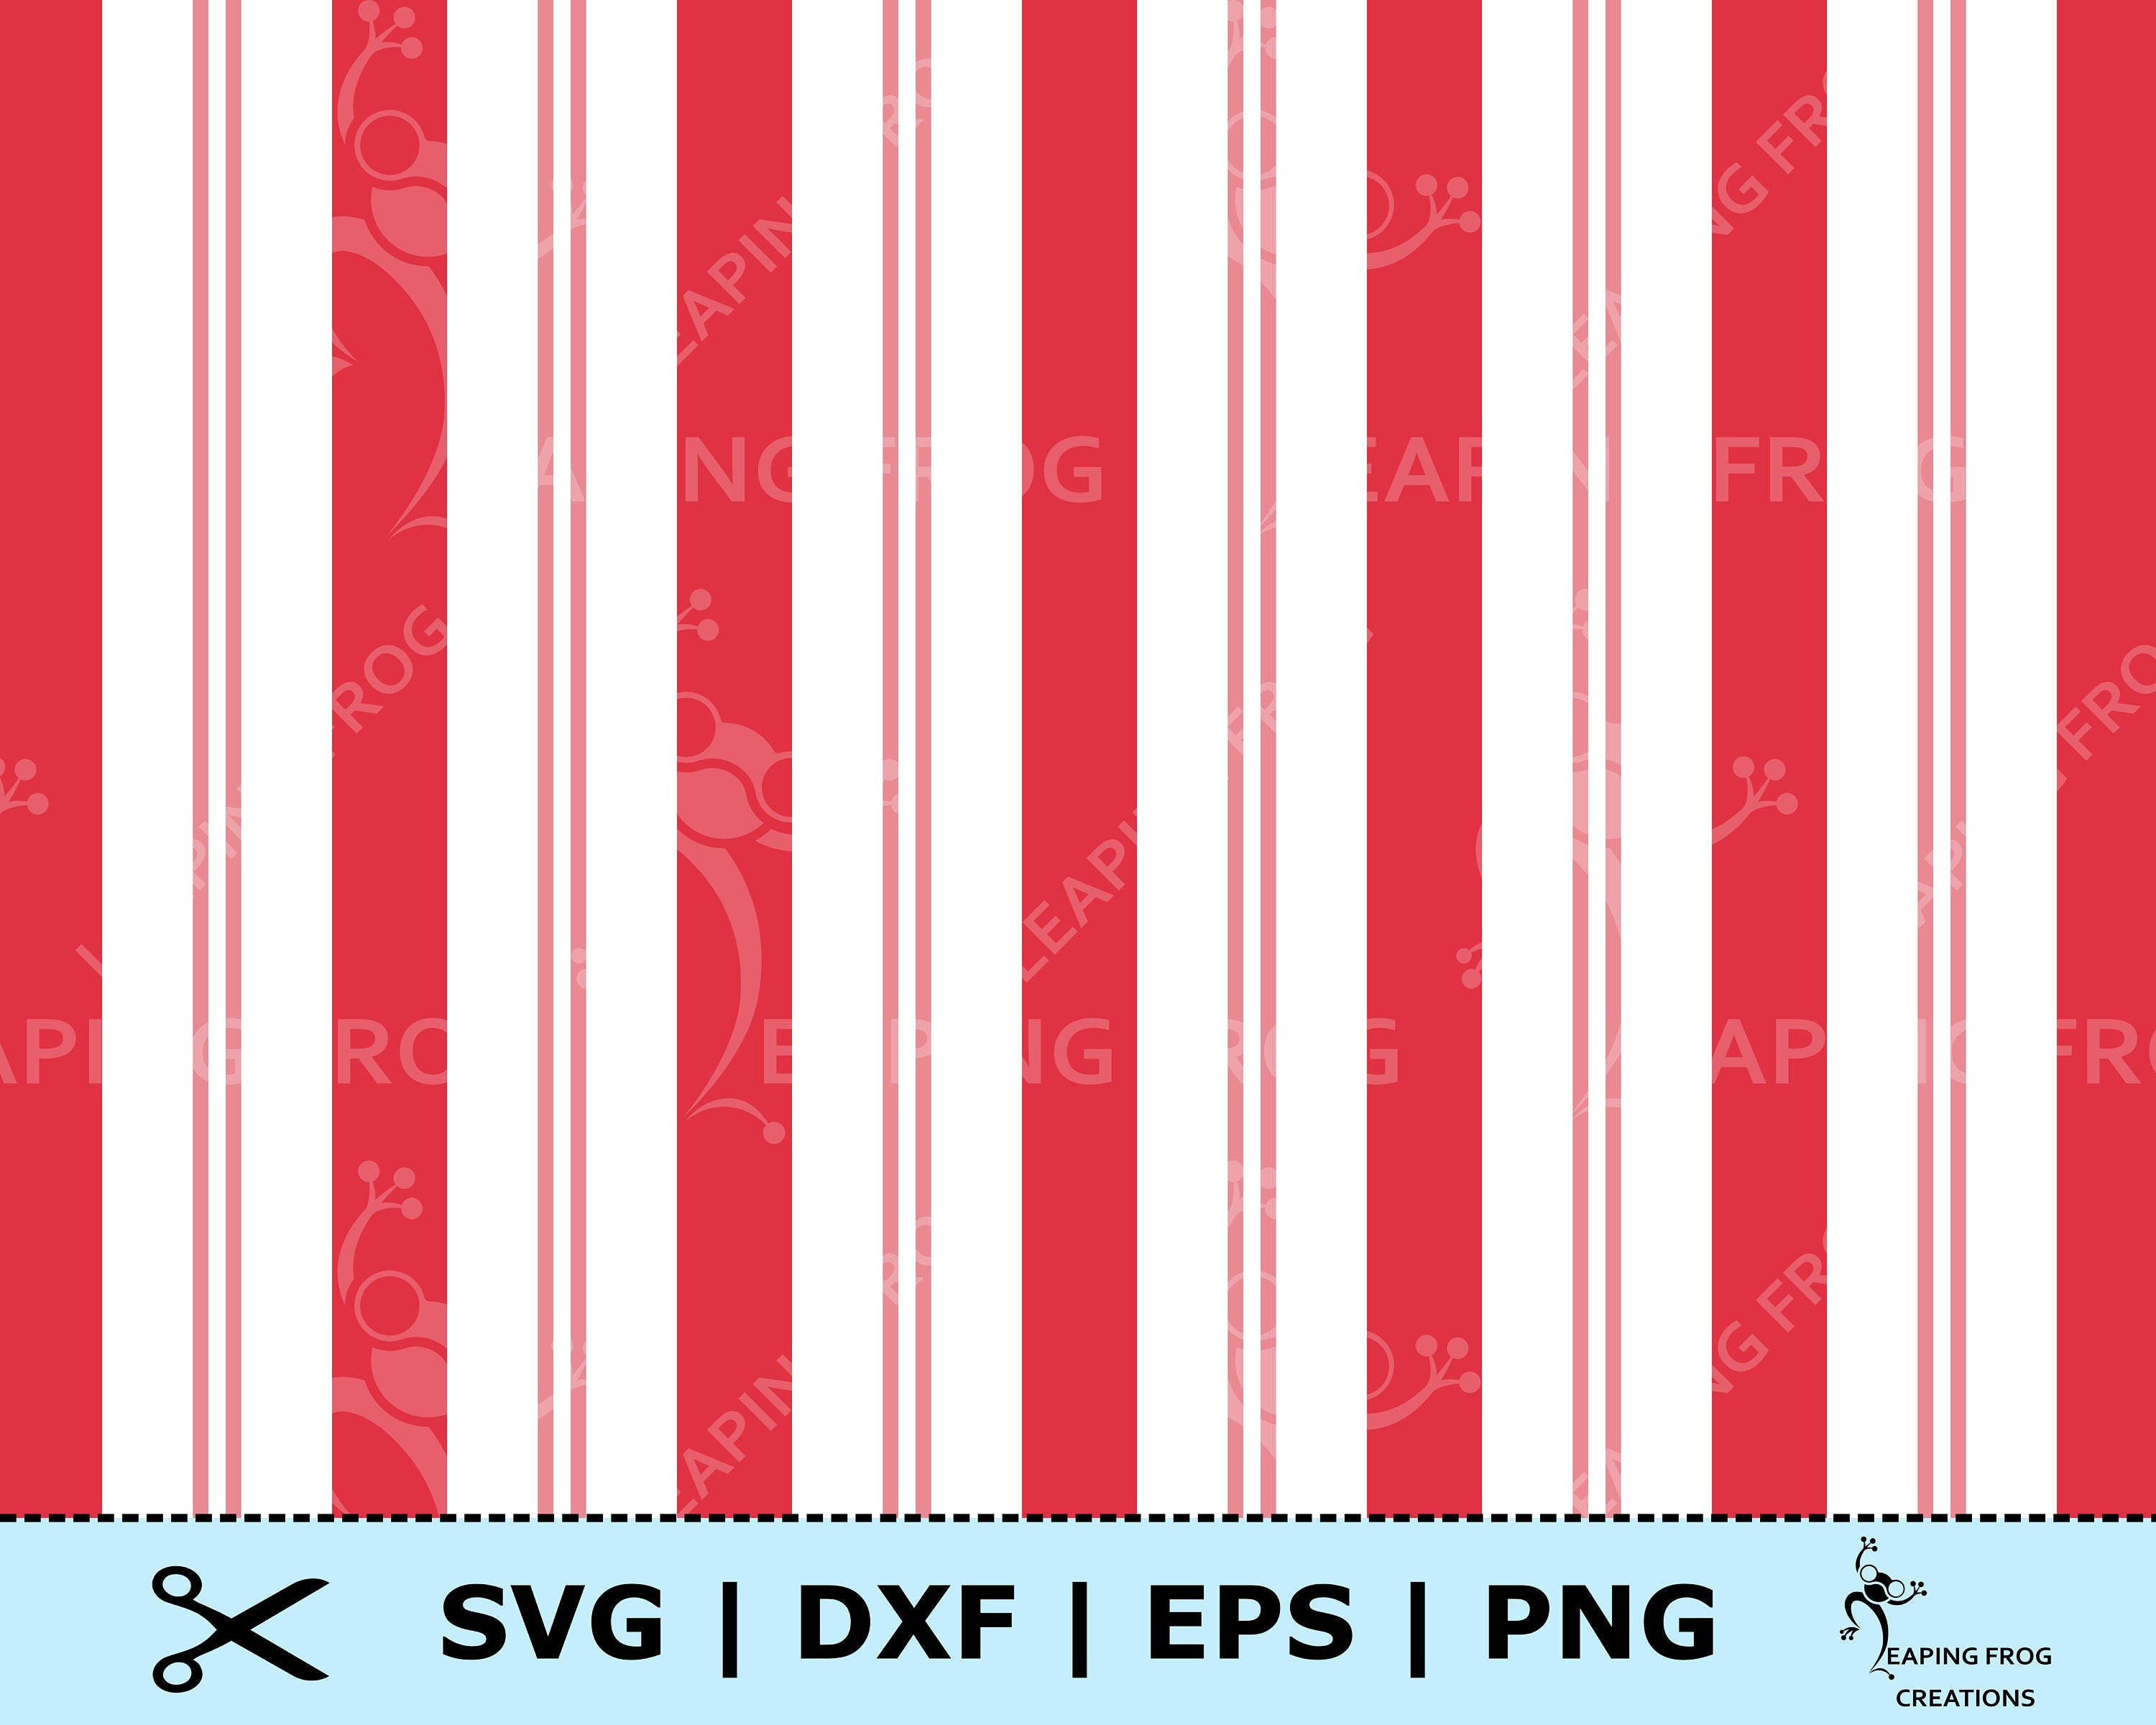 Candy Cane Pattern SVG. PNG. Seamless / Tiling / Repeating. Cricut cut files, Silhouette. Candy Cane Stripe Christmas DXF. Instant Download!